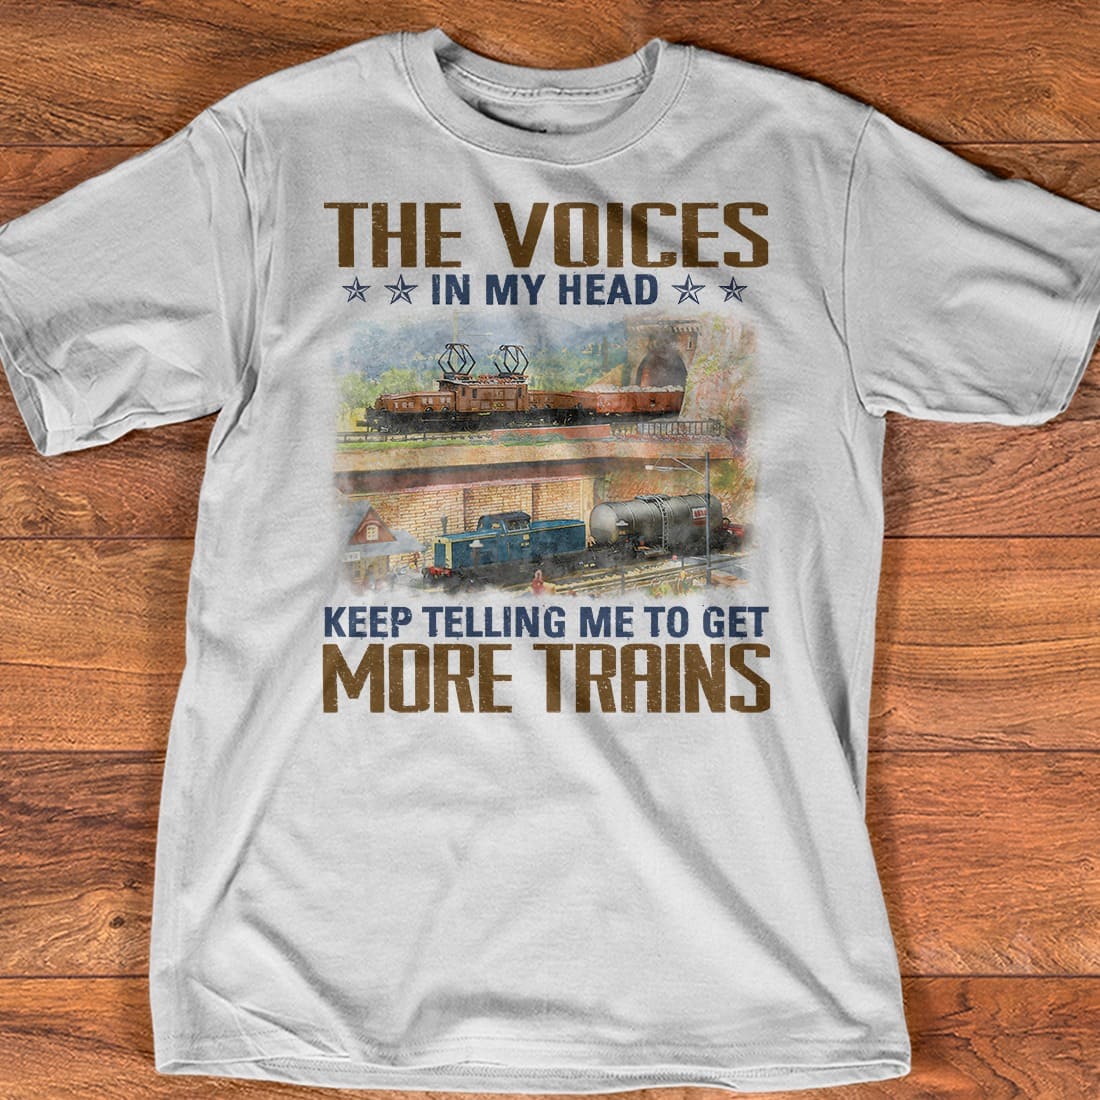 The voices in my head keep telling me to get more trains - Train collector T-shirt, gift for train lover